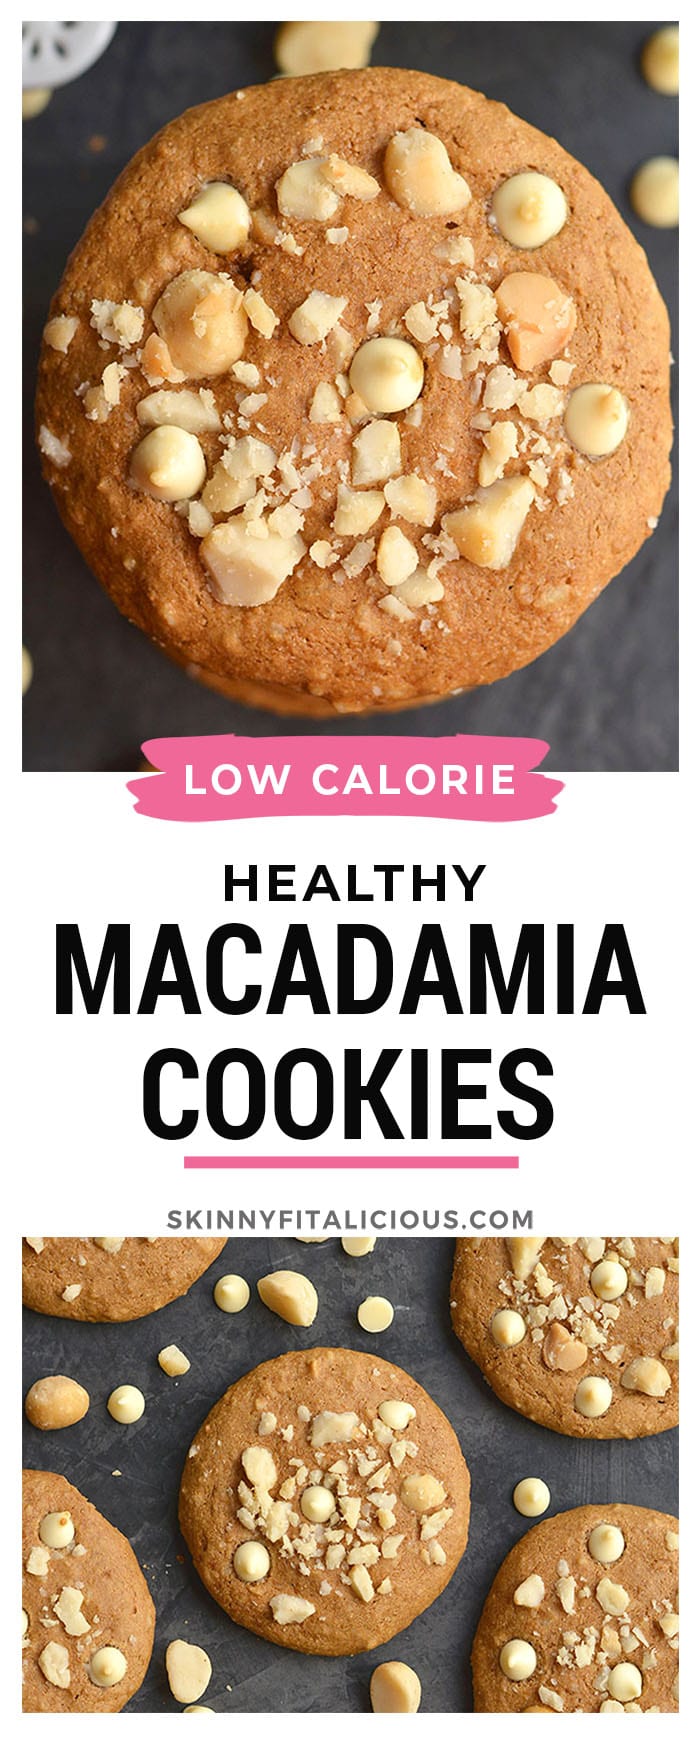 Healthy White Chocolate Macadamia Cookies! Made gluten free with applesauce for a lower sugar cookie recipe, that's lighter and healthier! Great for holiday baking or anytime of year when you want a cookie.